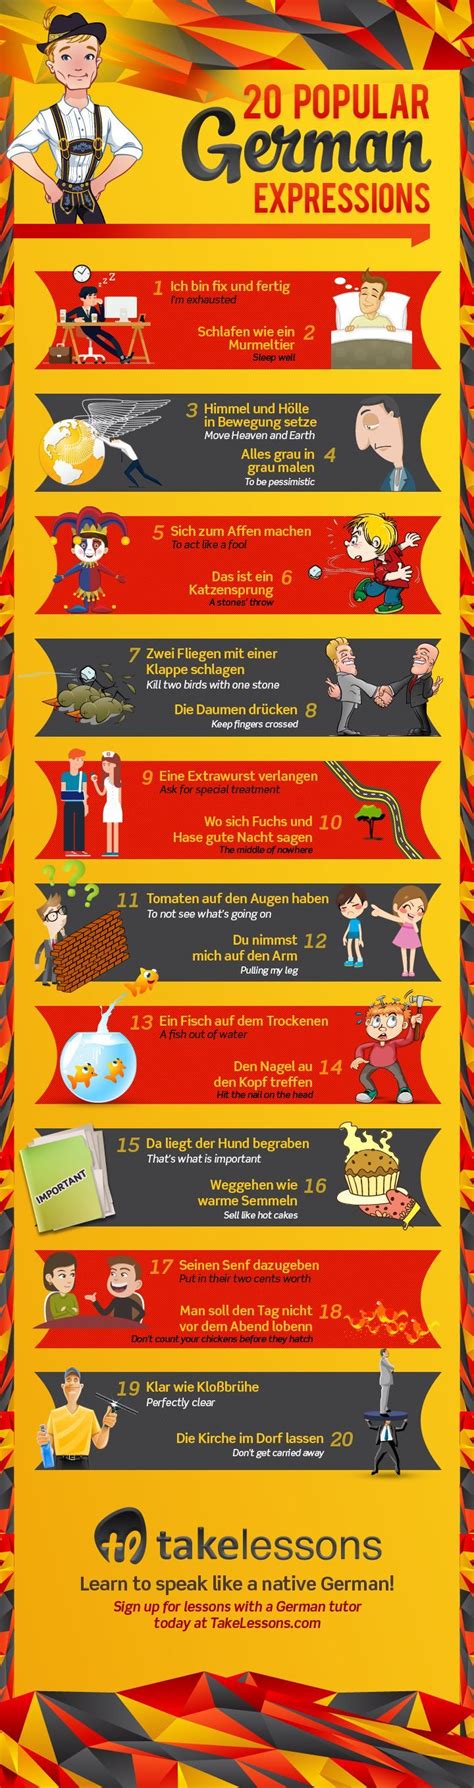 20 Popular German Expressions And What They Mean [infographic] German Language Learning